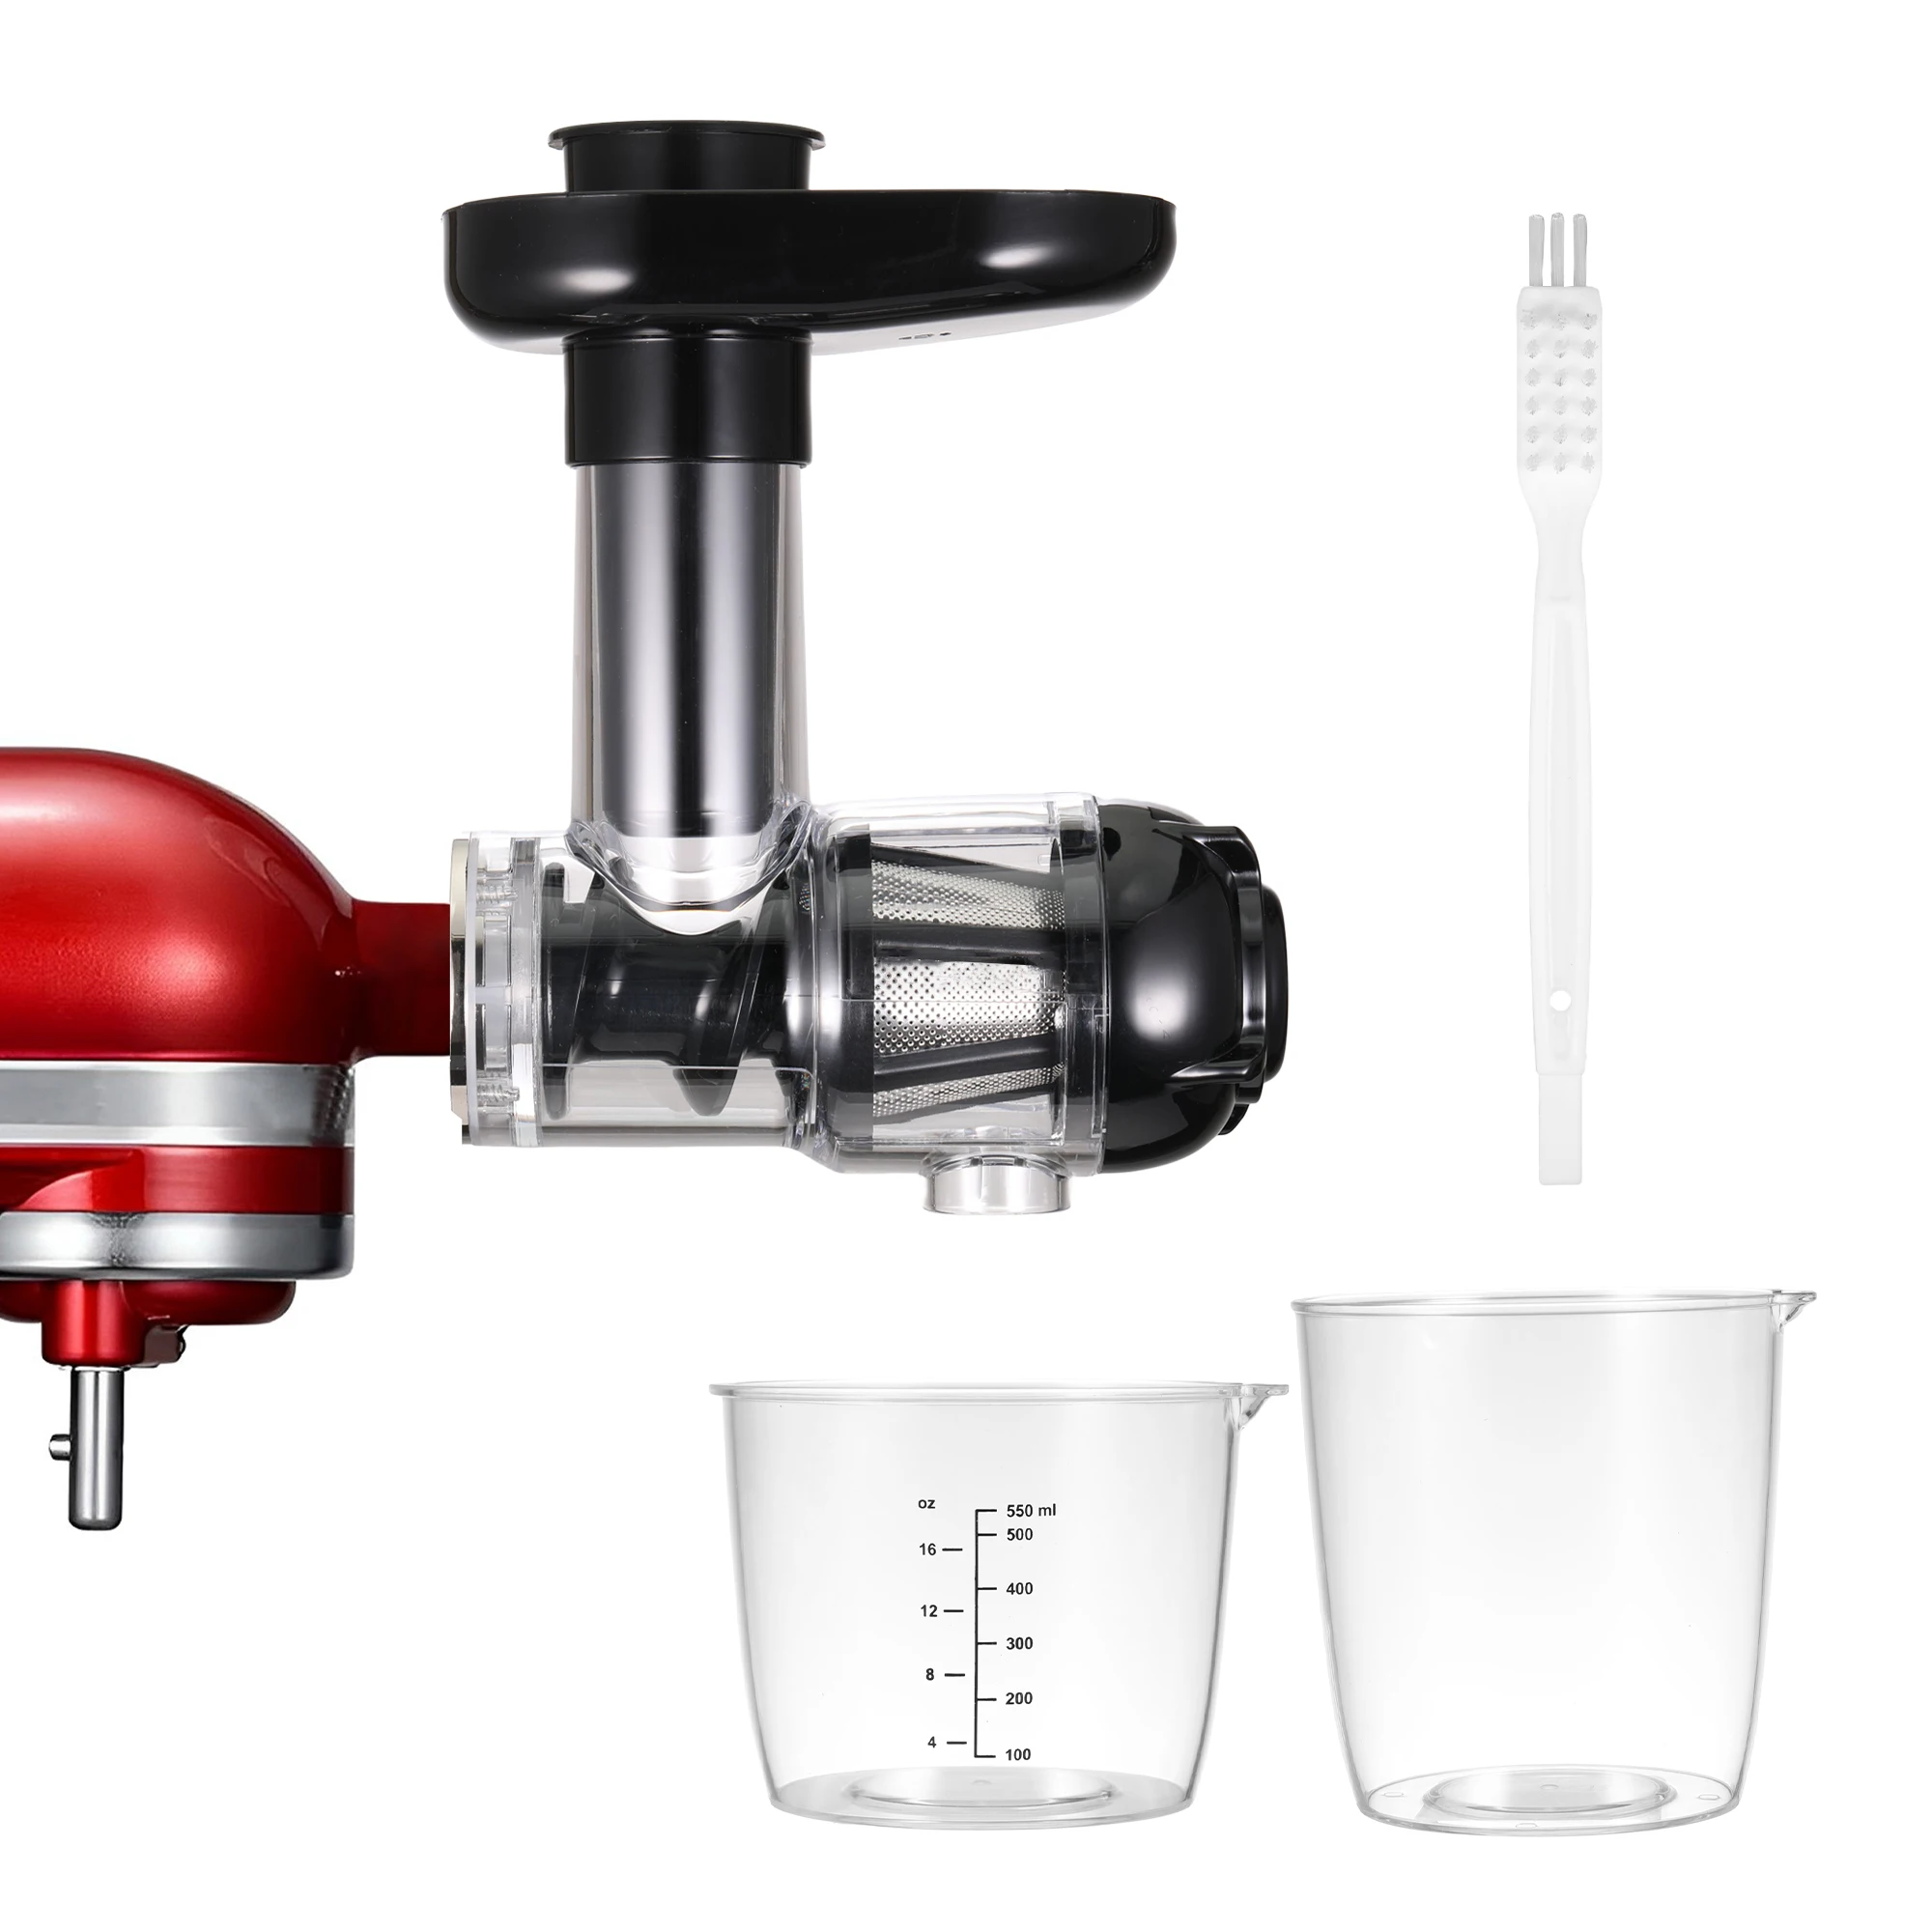 Stand Mixer: Juicer and Sauce Attachment